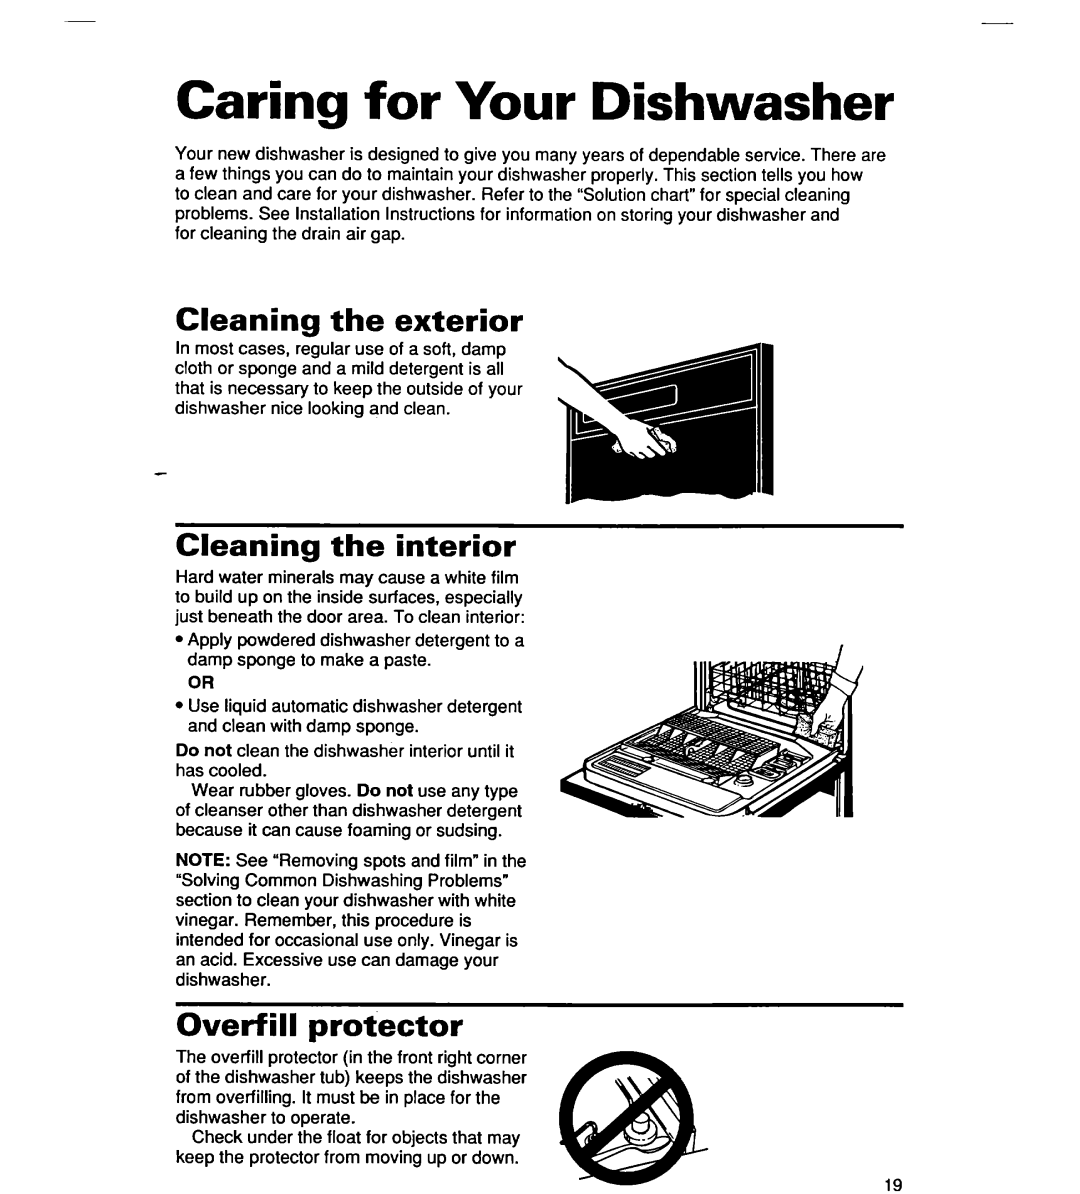 Whirlpool SERIES 940 warranty Caring for Your Dishwasher, Cleaning the exterior Cleaning the interior, Overfill protector 